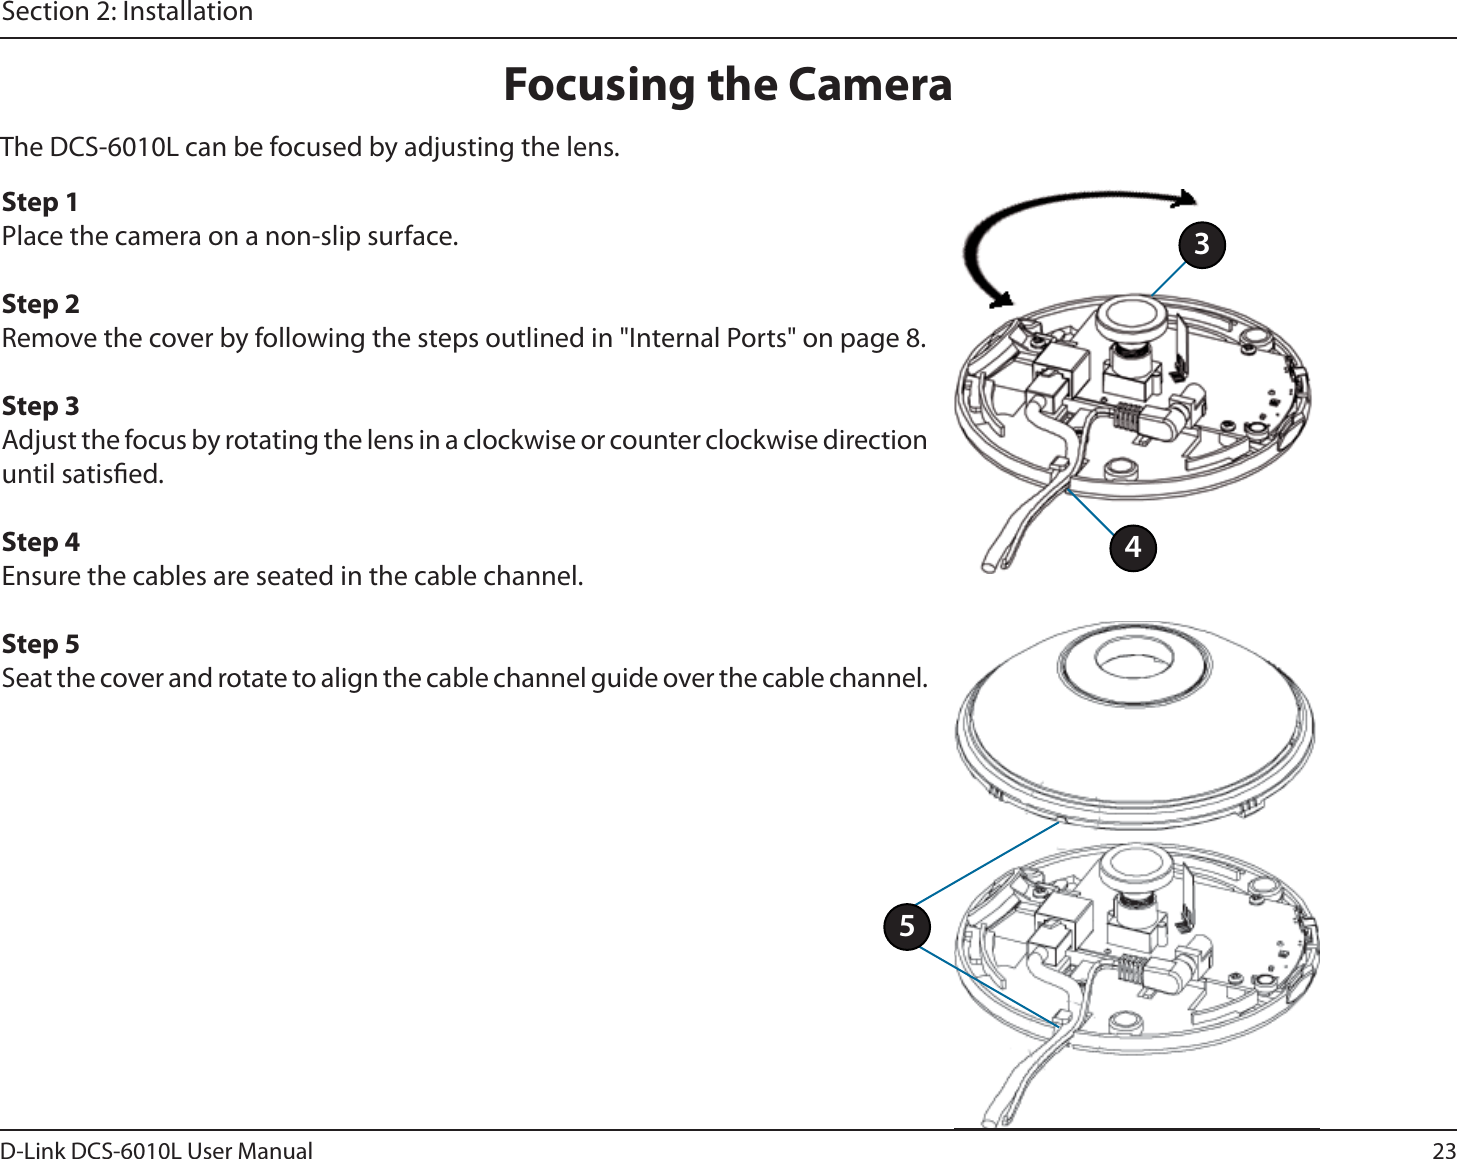 23D-Link DCS-6010L User ManualSection 2: InstallationFocusing the CameraThe DCS-6010L can be focused by adjusting the lens. Step 1Place the camera on a non-slip surface.Step 2Remove the cover by following the steps outlined in &quot;Internal Ports&quot; on page 8.Step 3Adjust the focus by rotating the lens in a clockwise or counter clockwise direction until satised.Step 4Ensure the cables are seated in the cable channel.Step 5Seat the cover and rotate to align the cable channel guide over the cable channel.435